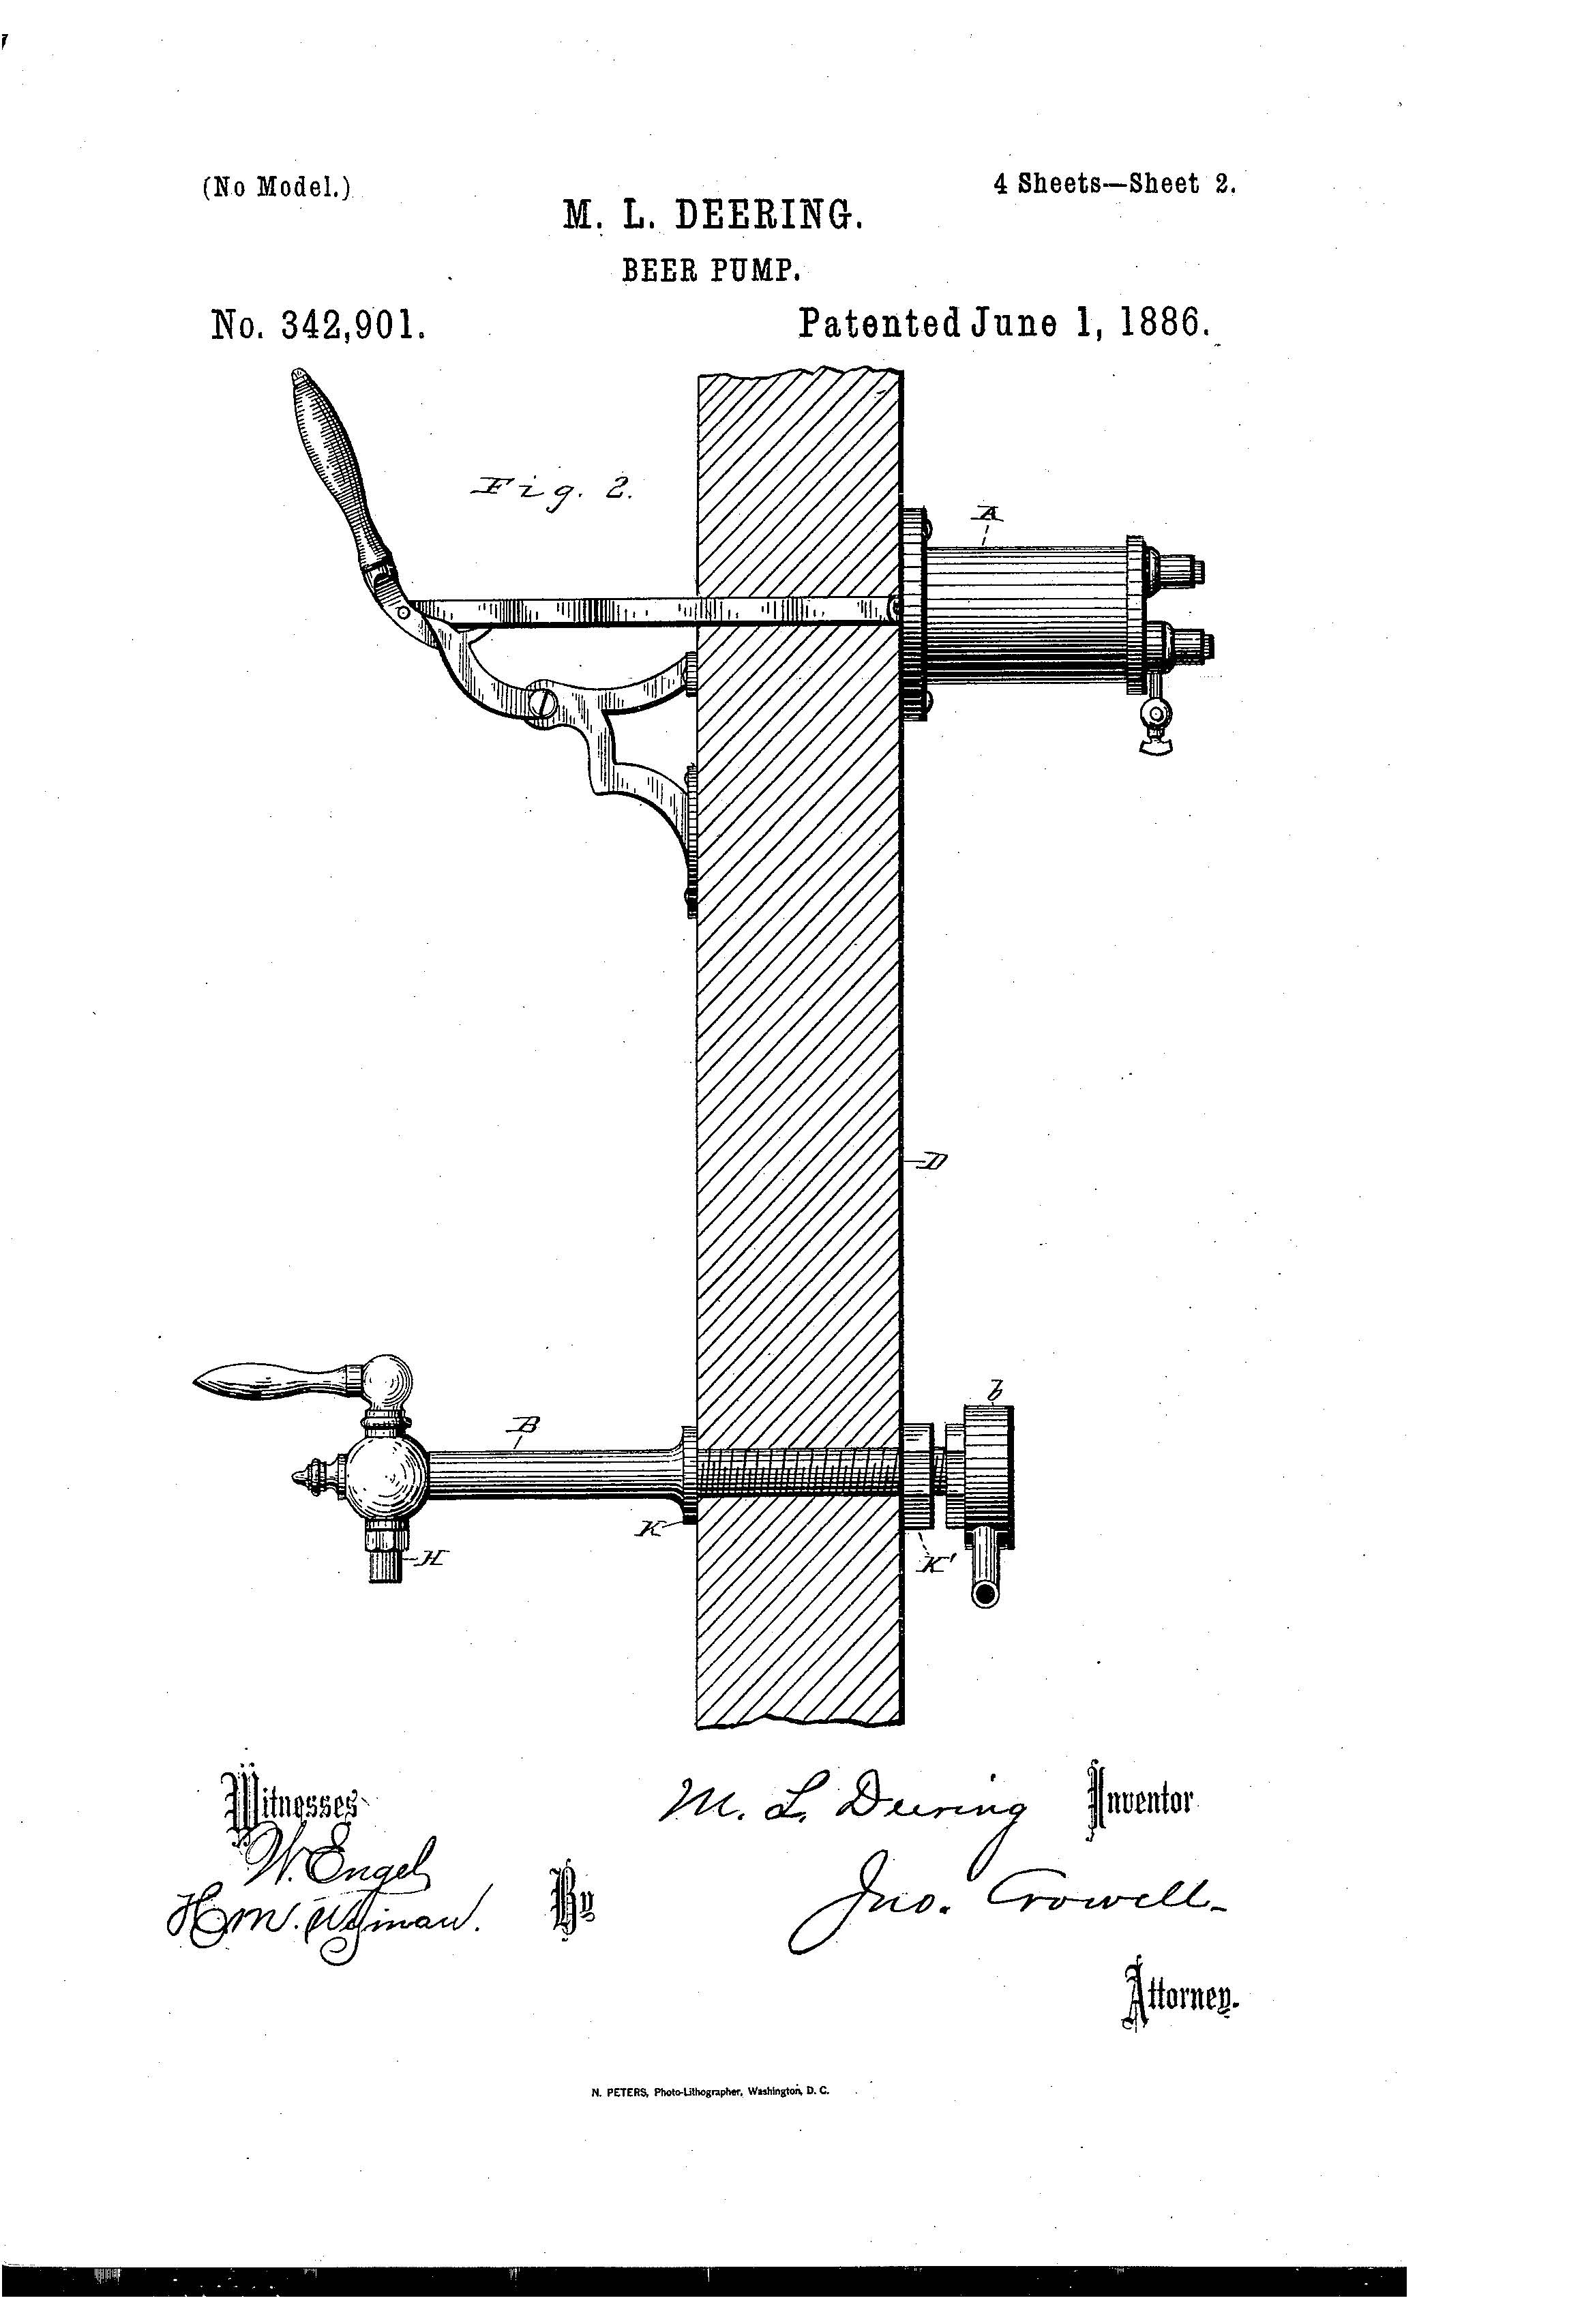 Patent-Illustration-Beer-Pump_Page_2